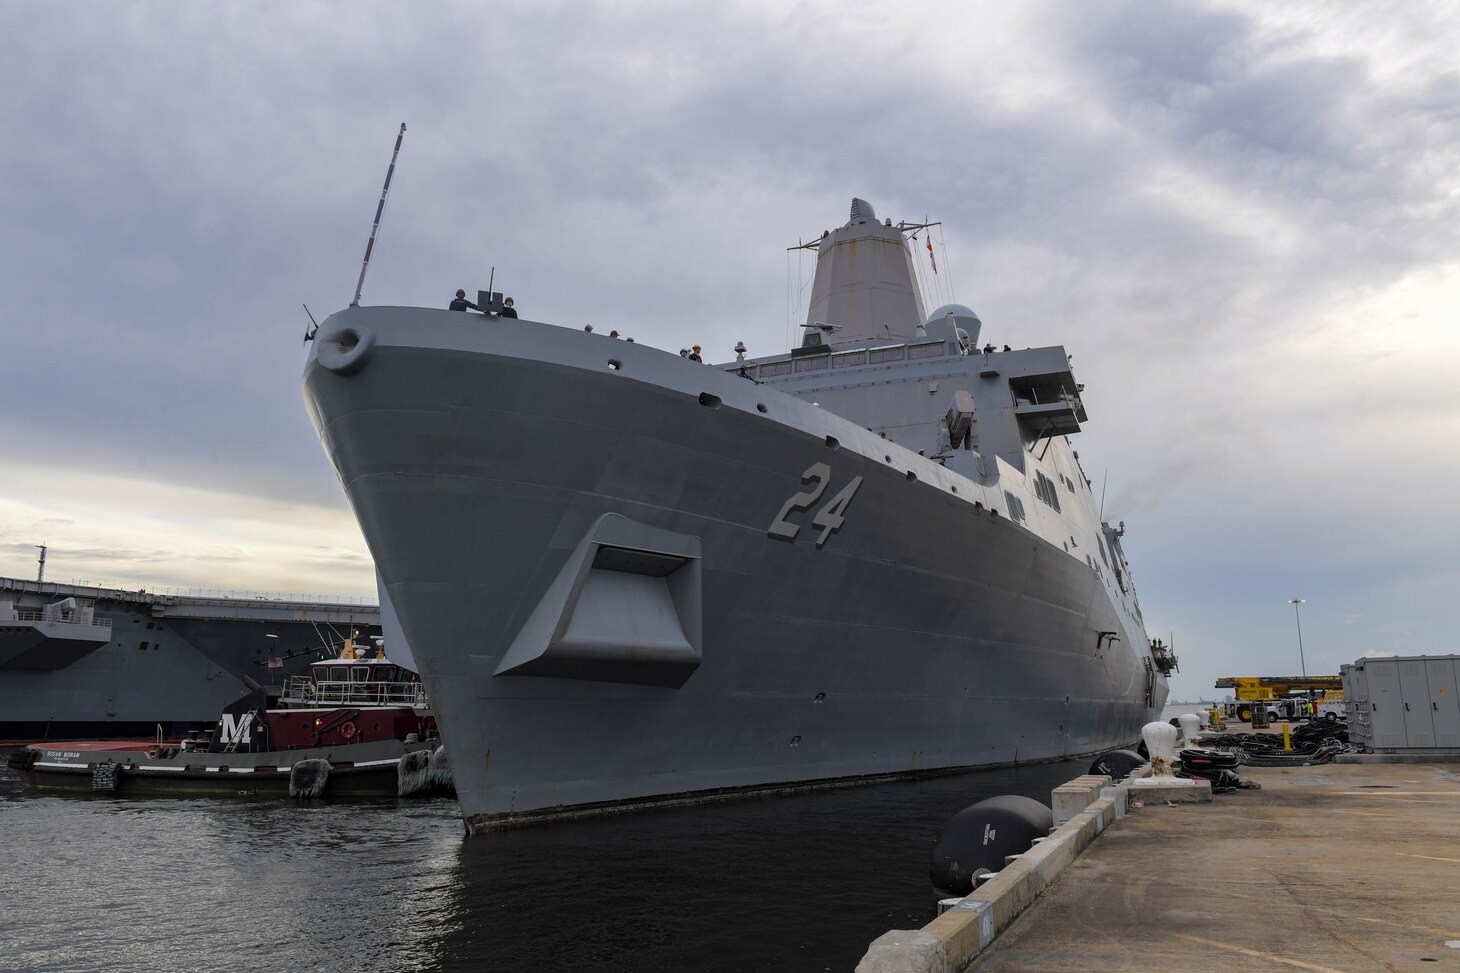 NAVAL STATION NORFOLK (Aug. 17, 2021) The amphibious transport dock ship USS Arlington (LPD 24) departs Naval Station Norfolk.  Arlington will support humanitarian assistance and disaster relief (HADR) efforts in Haiti following a 7.2-magnitude earthquake on Aug. 14, 2021. (U.S. Navy photo by Mass Communication Specialist 1st Class Jacob Milham)